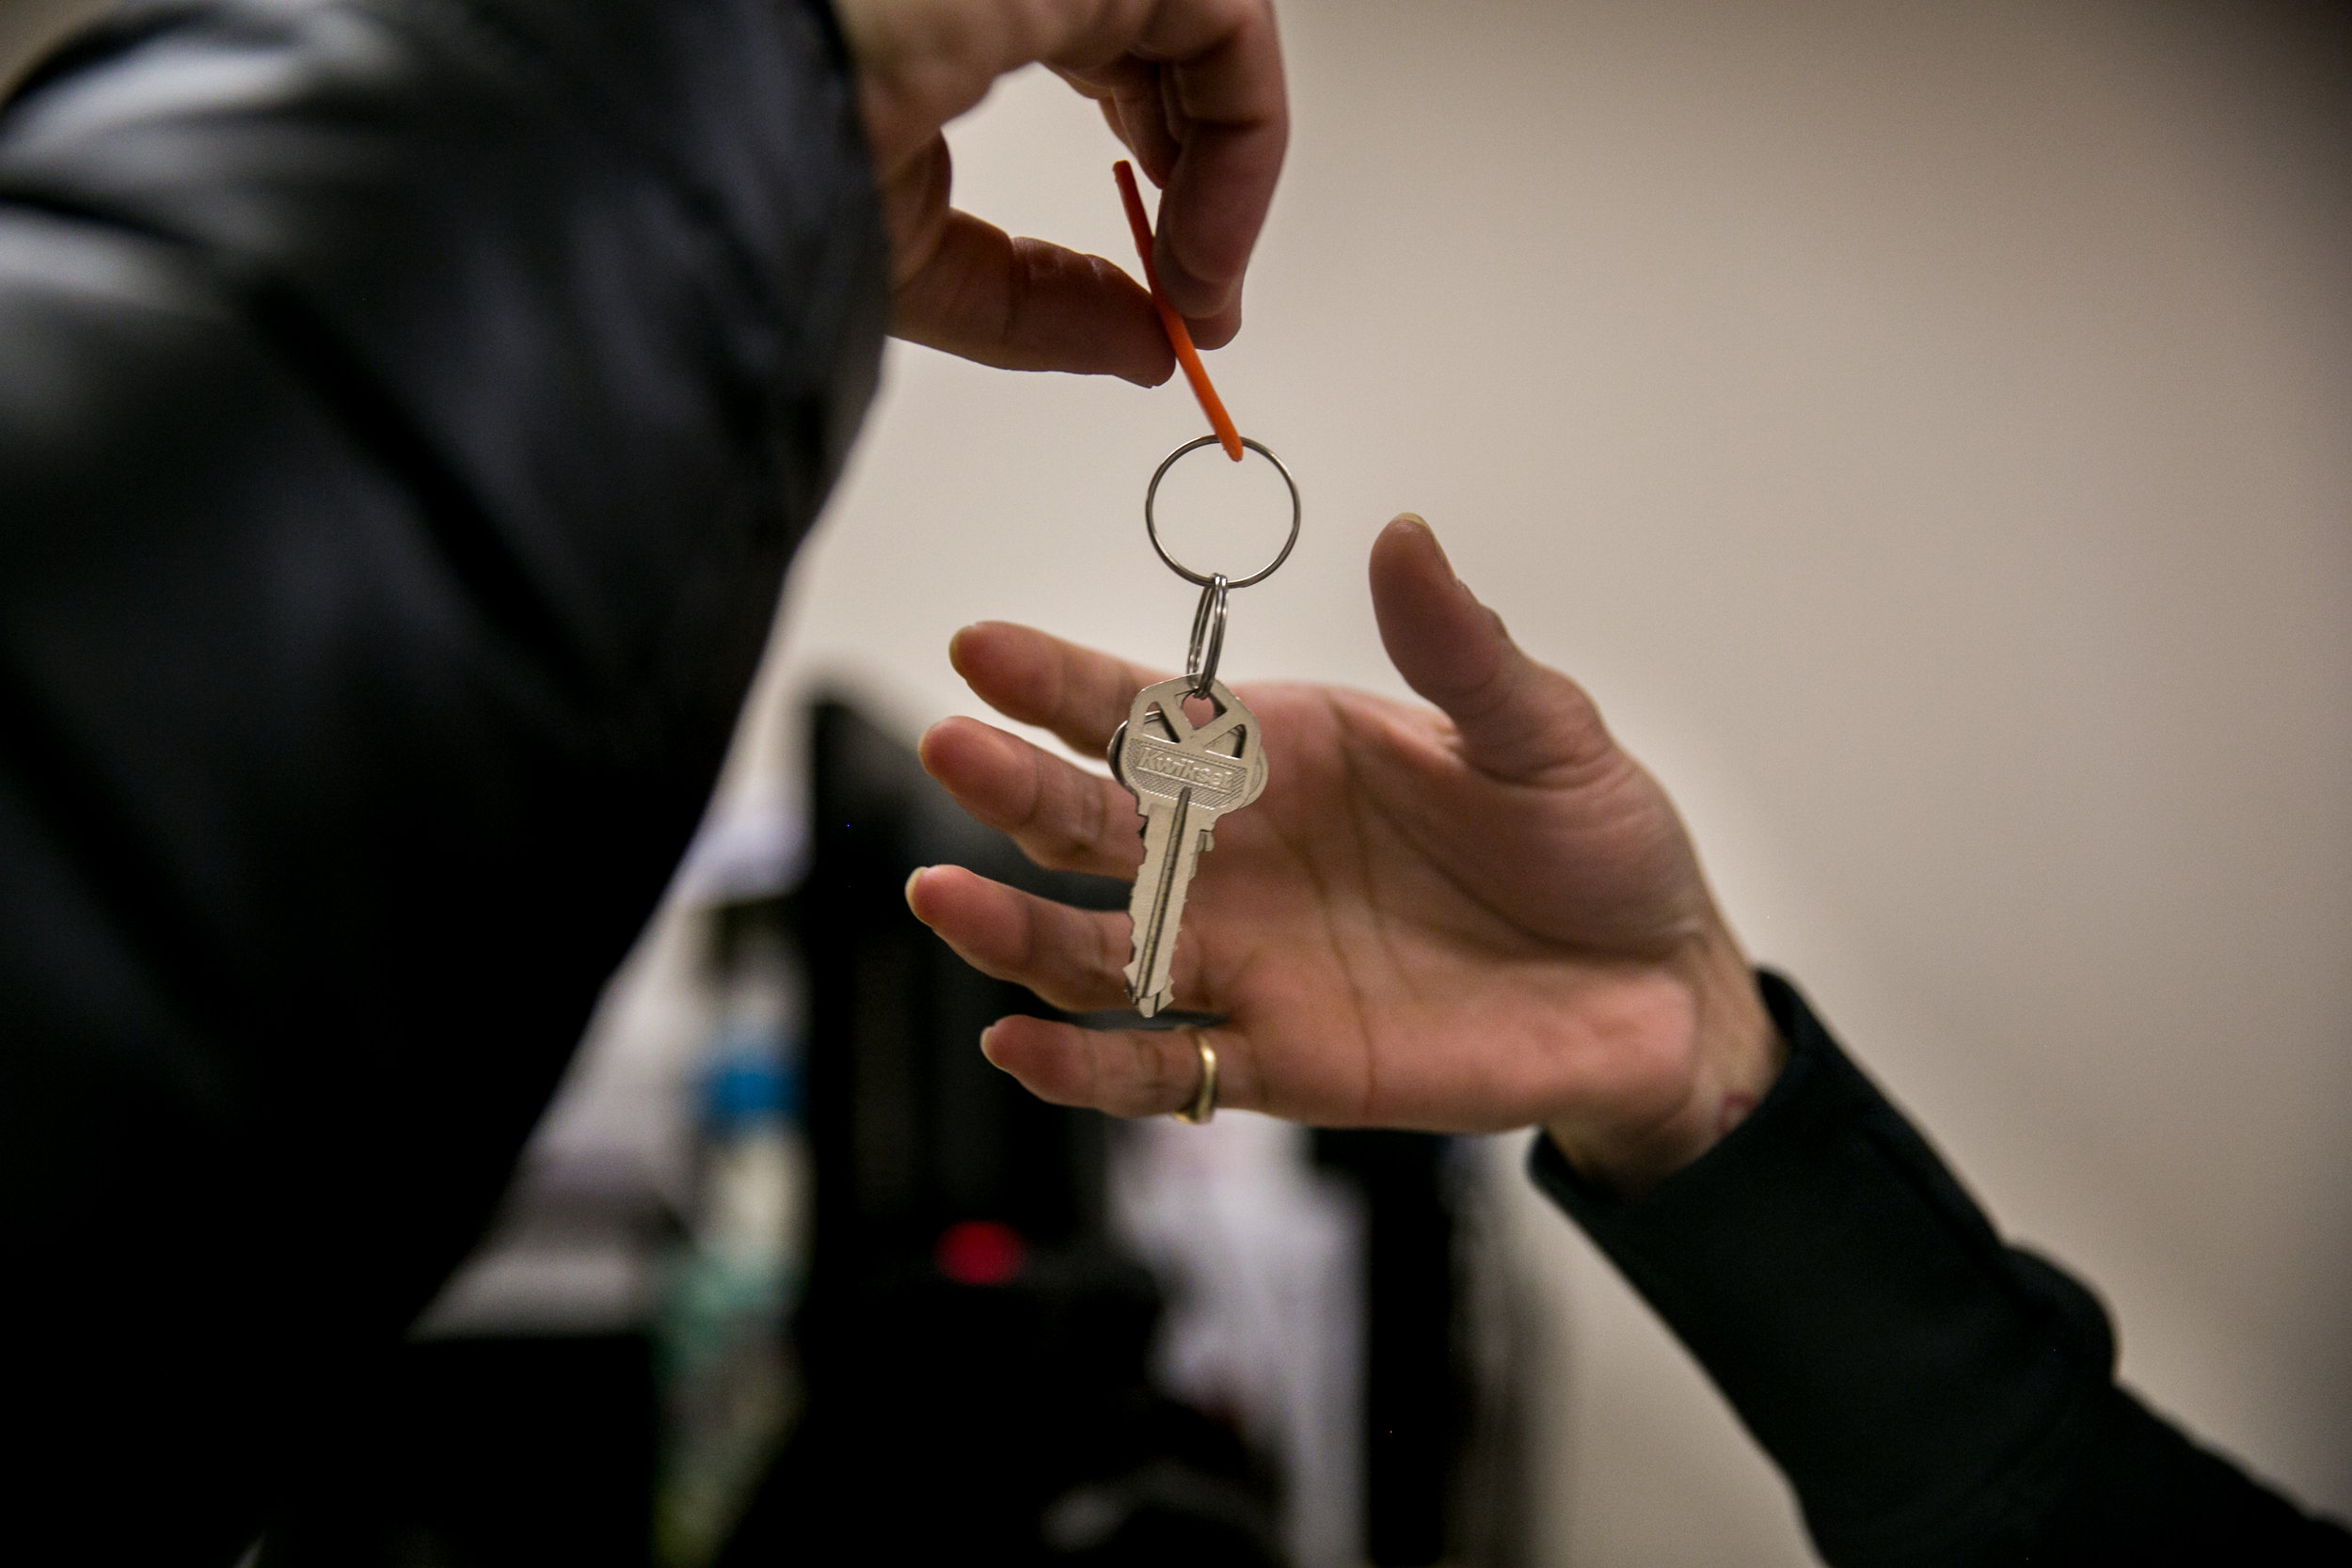  Landlord Israel M. Samet hands Madelyn Brito keys to her new apartment at the city's Human Resources Administration offices on East 16th Street in New York, New York. This set of keys later turned out to be the wrong set, keeping Brito waiting on th